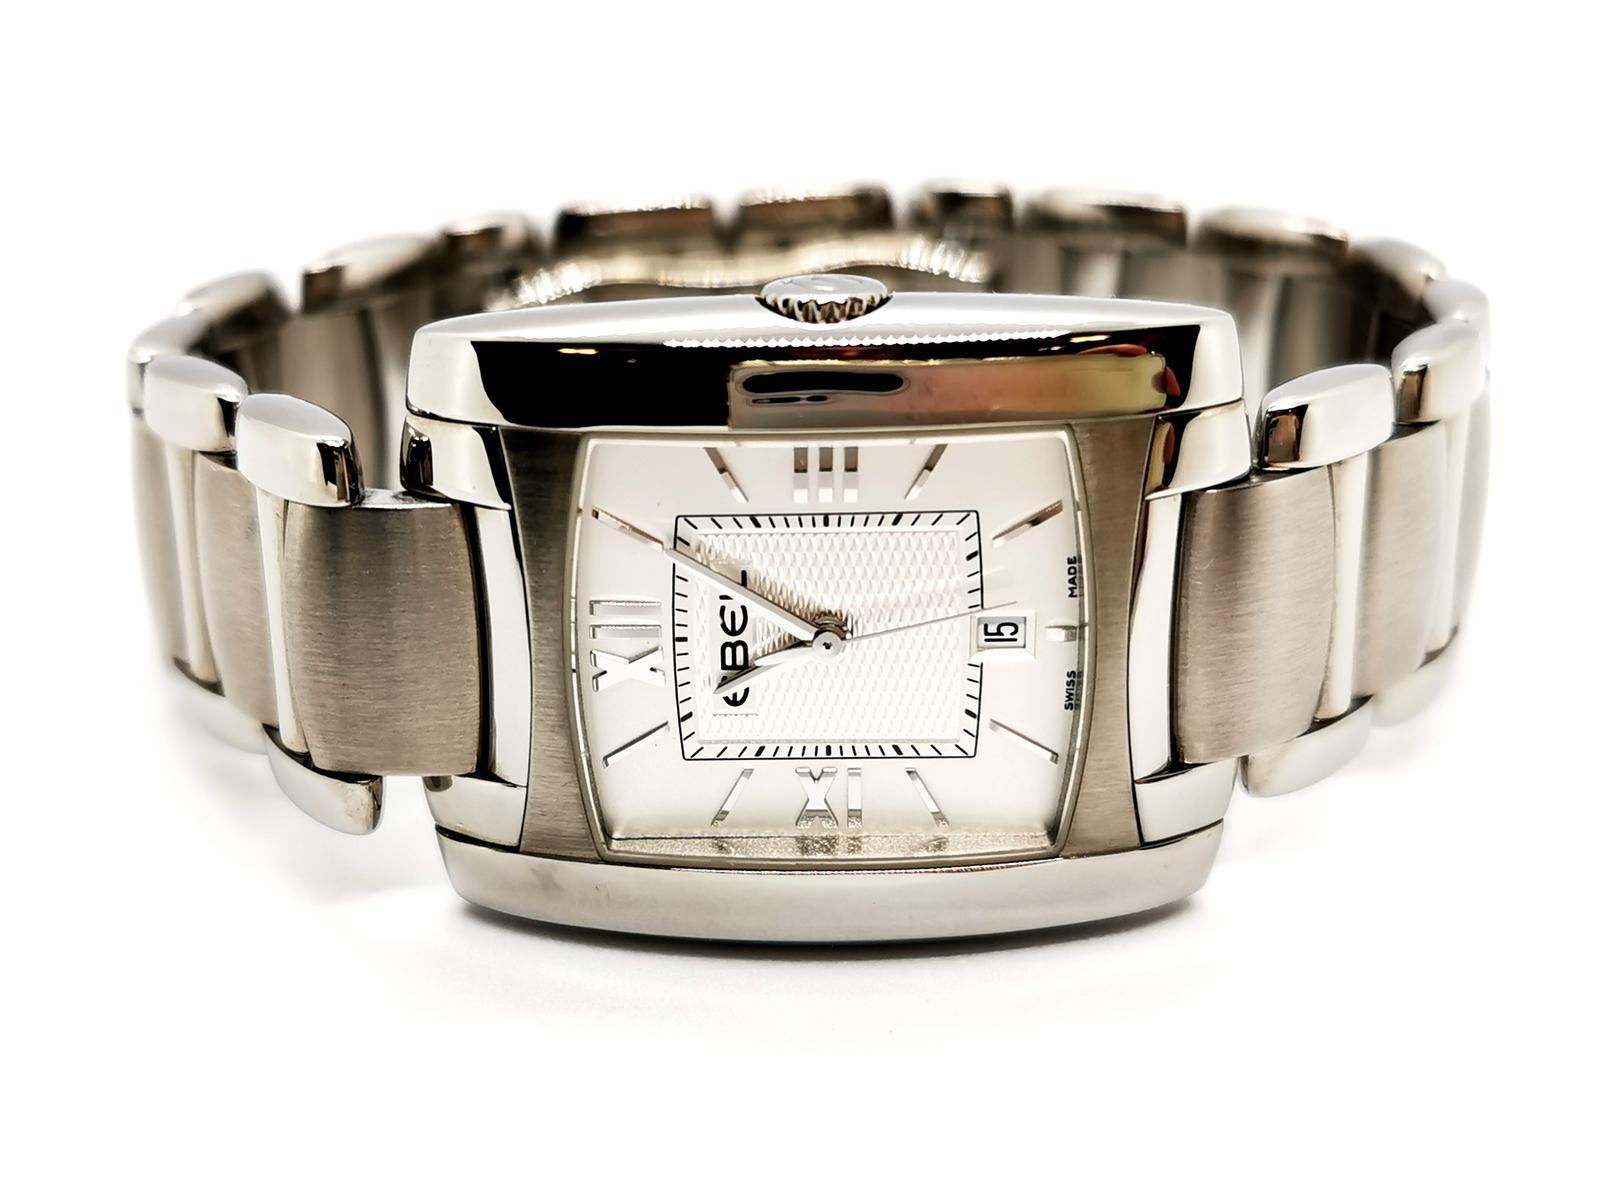 Women's watch. signed from home Ebel Brasilia model. stainless steel. quartz movement. white dial. Roman numerals. date. folding buckles. sapphire. rectangular housing. housing size: 2.8 cm x 3.4 cm. length 21 cm. strap width: 1.85 cm. total weight: